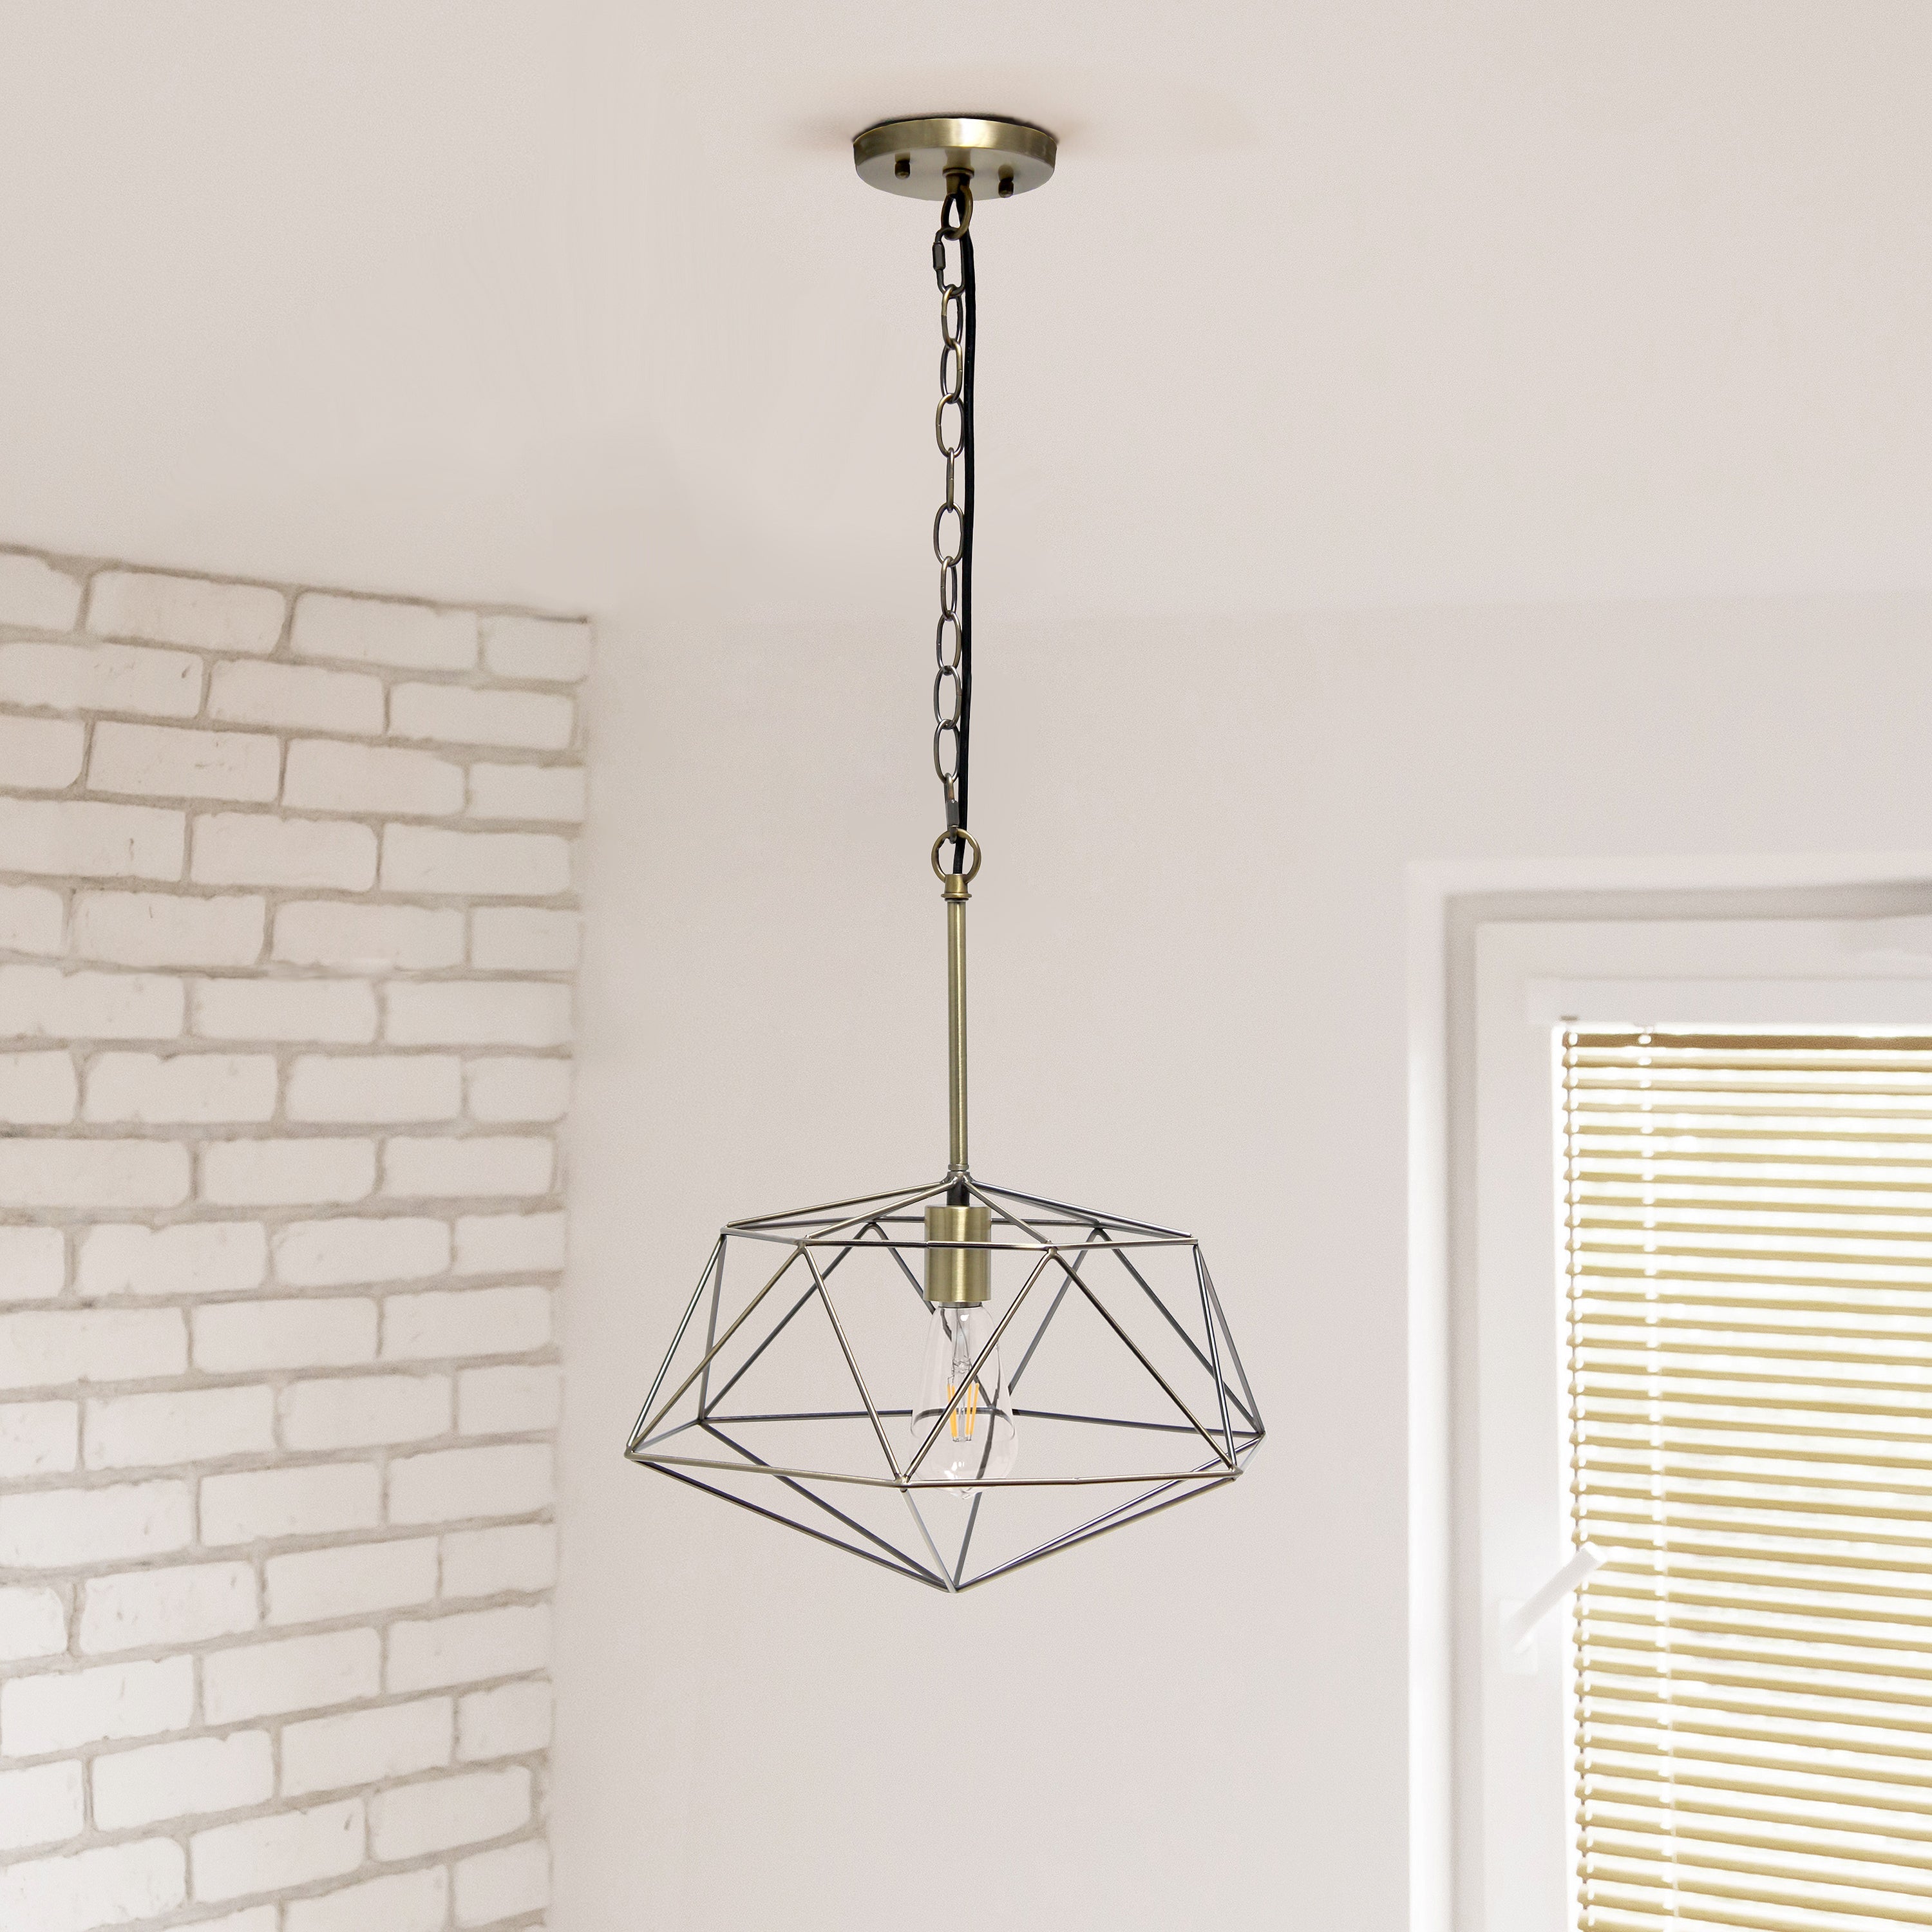 Elegant Designs Large 16inches Geometric Diamond Shaped Pendant Industrial Metal Wire Cage Hanging Ceiling 1 Light Fixture Antique Brass